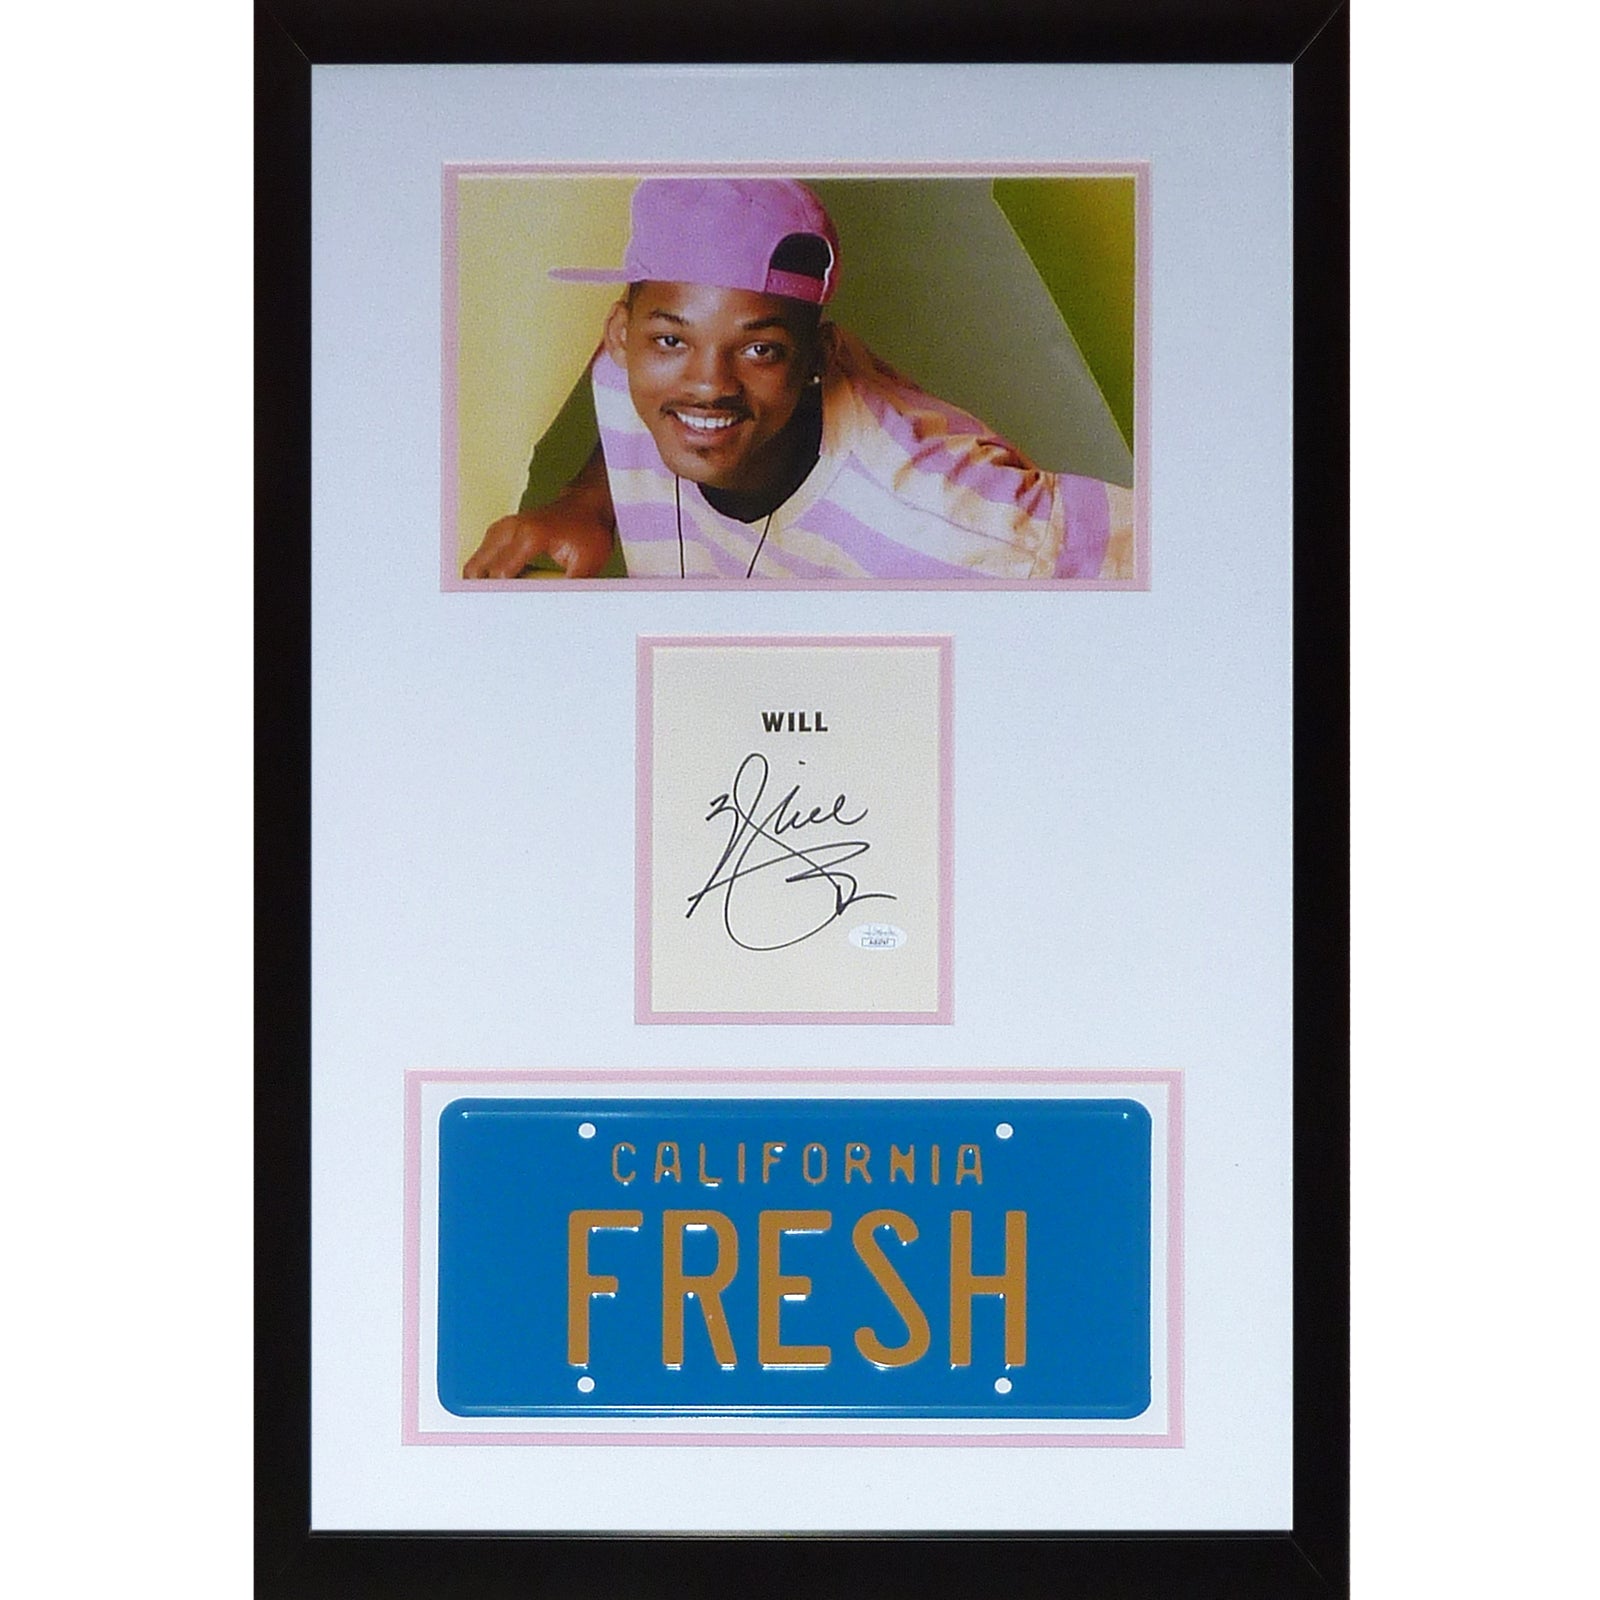 Will Smith Fresh Prince of Bel Air 11x14 Deluxe Framed with Autograph and FRESH License Plate - JSA